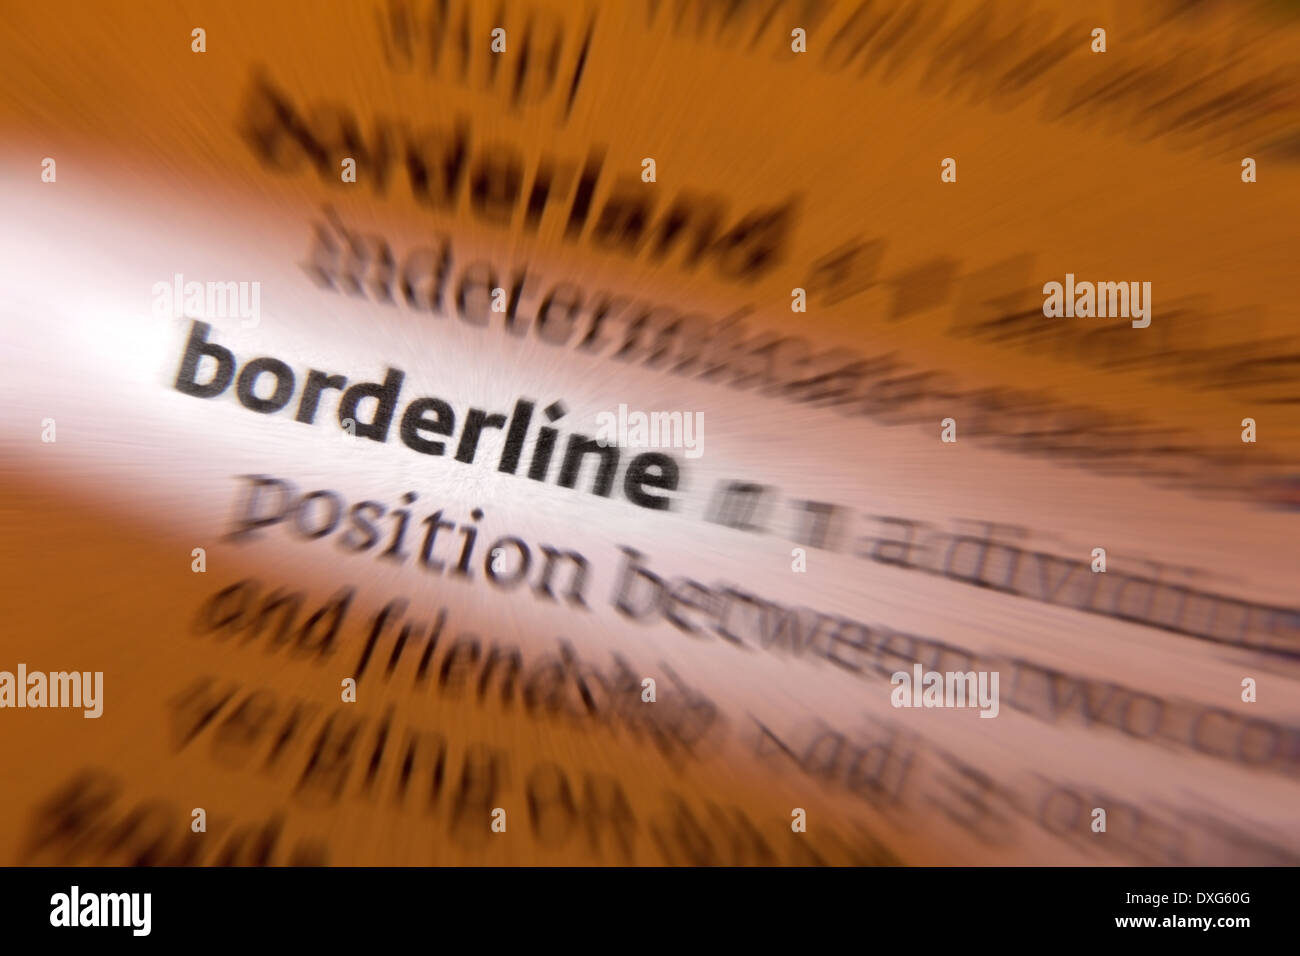 Borderline - a division between two distinct (often extreme) conditions. Stock Photo